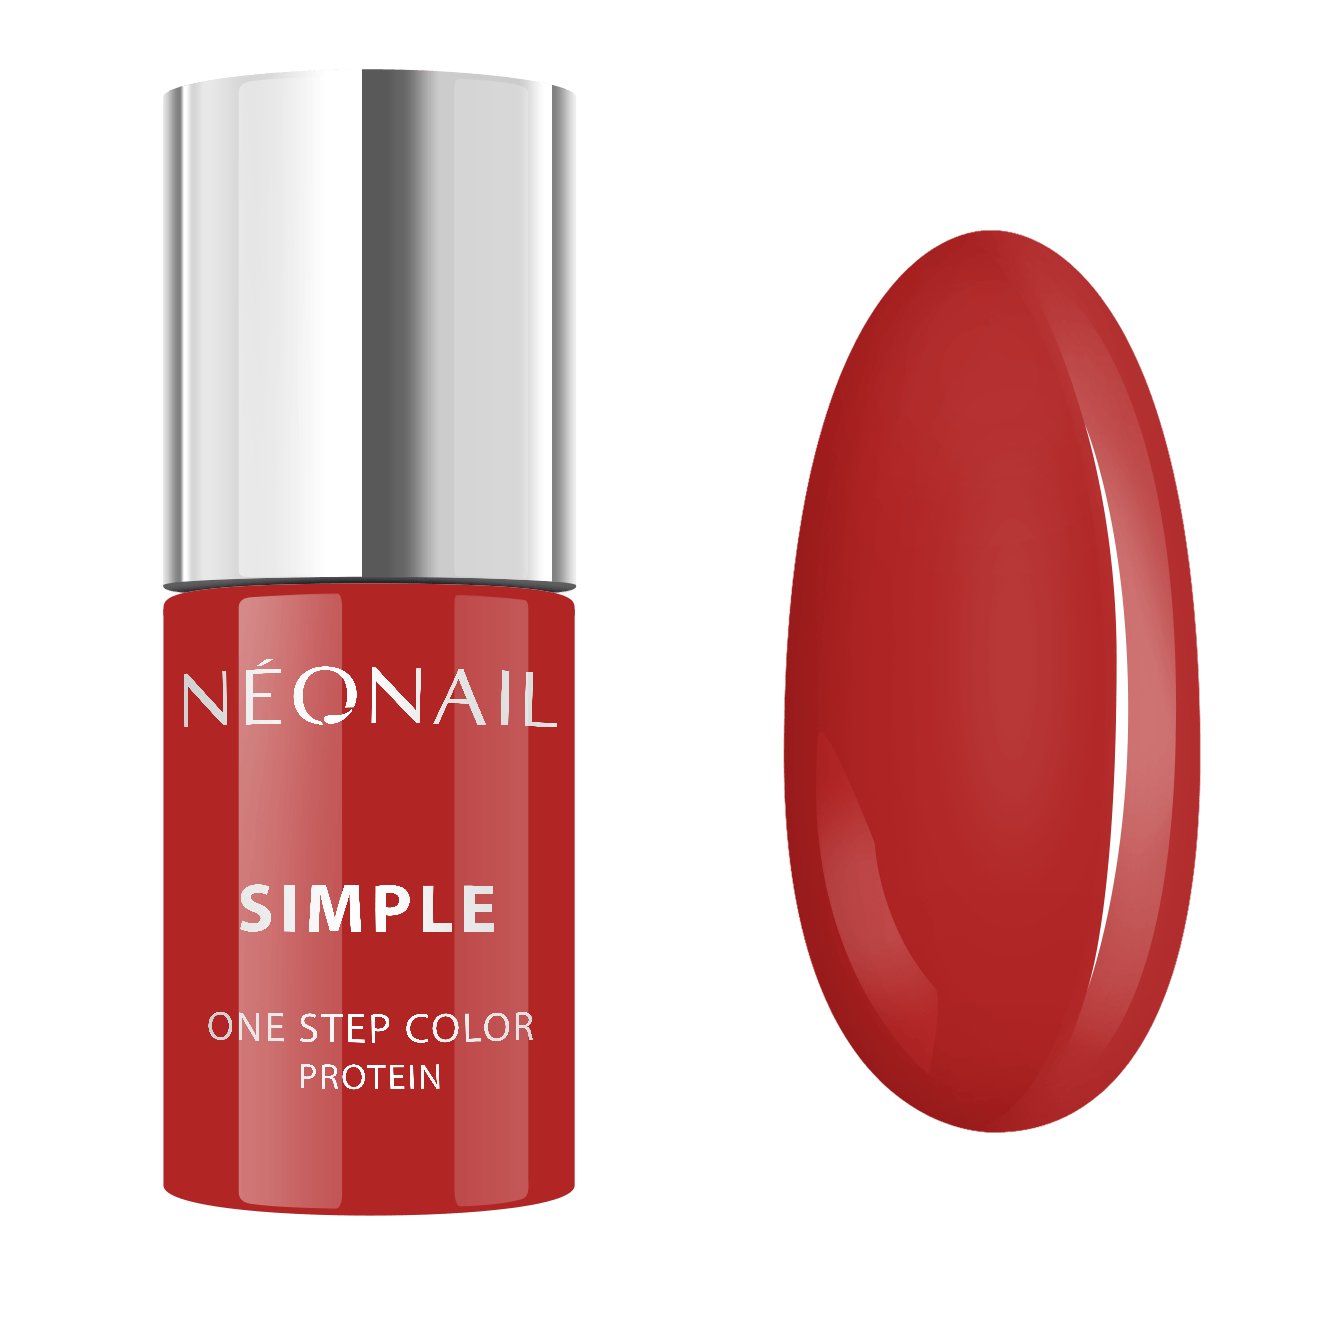 NeoNail Simple One Step Color Protein 7,2ml - Passionate